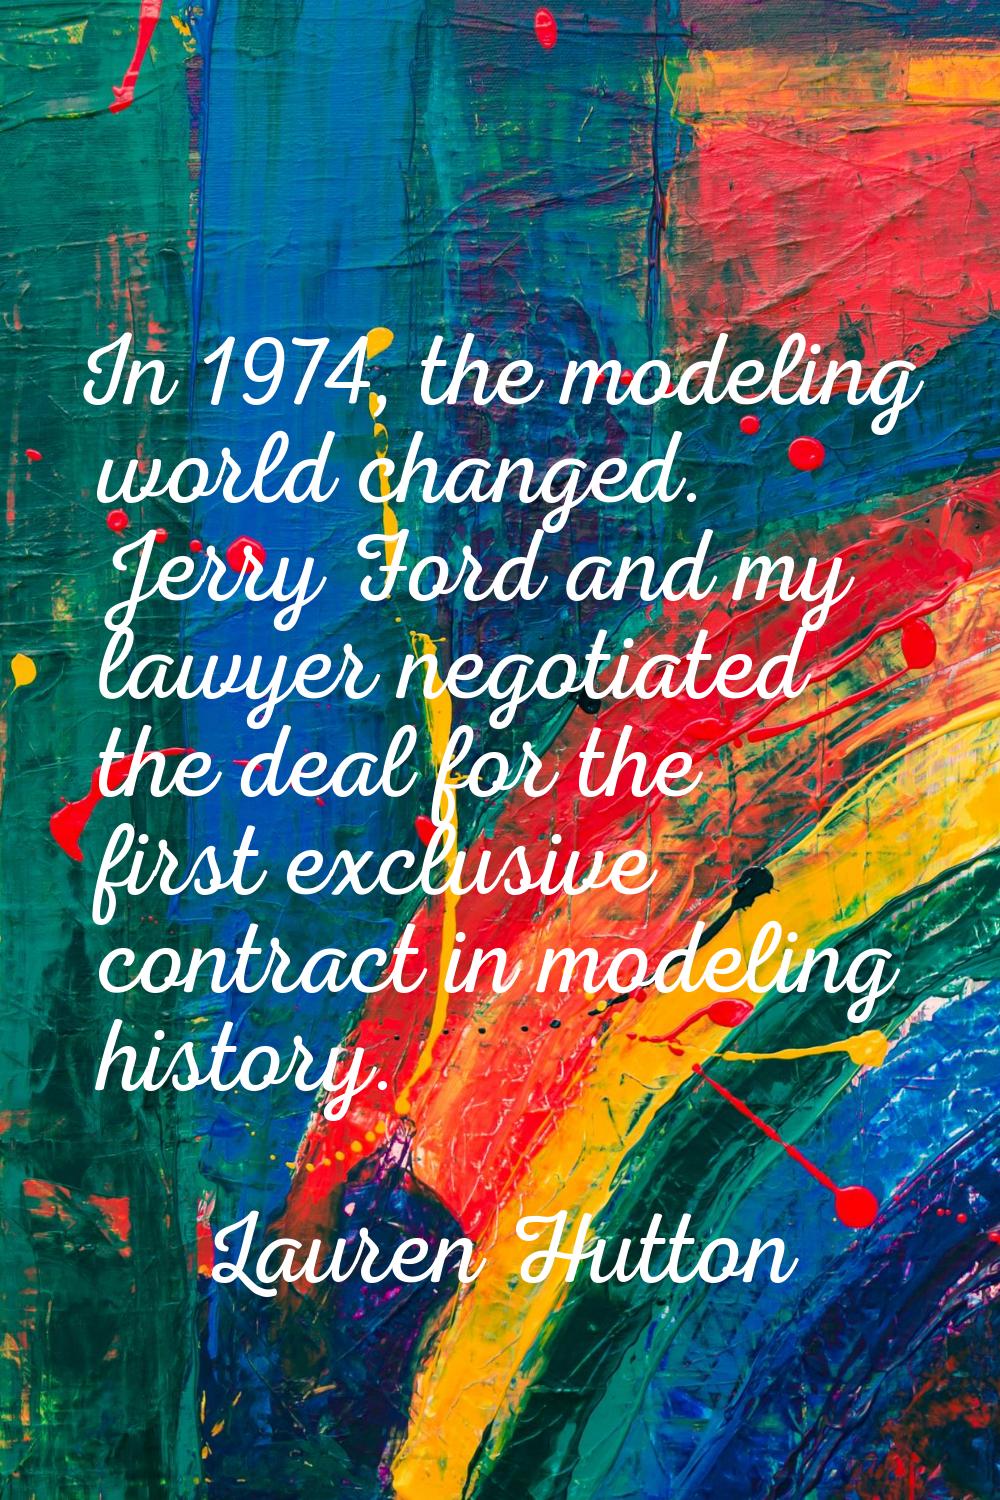 In 1974, the modeling world changed. Jerry Ford and my lawyer negotiated the deal for the first exc